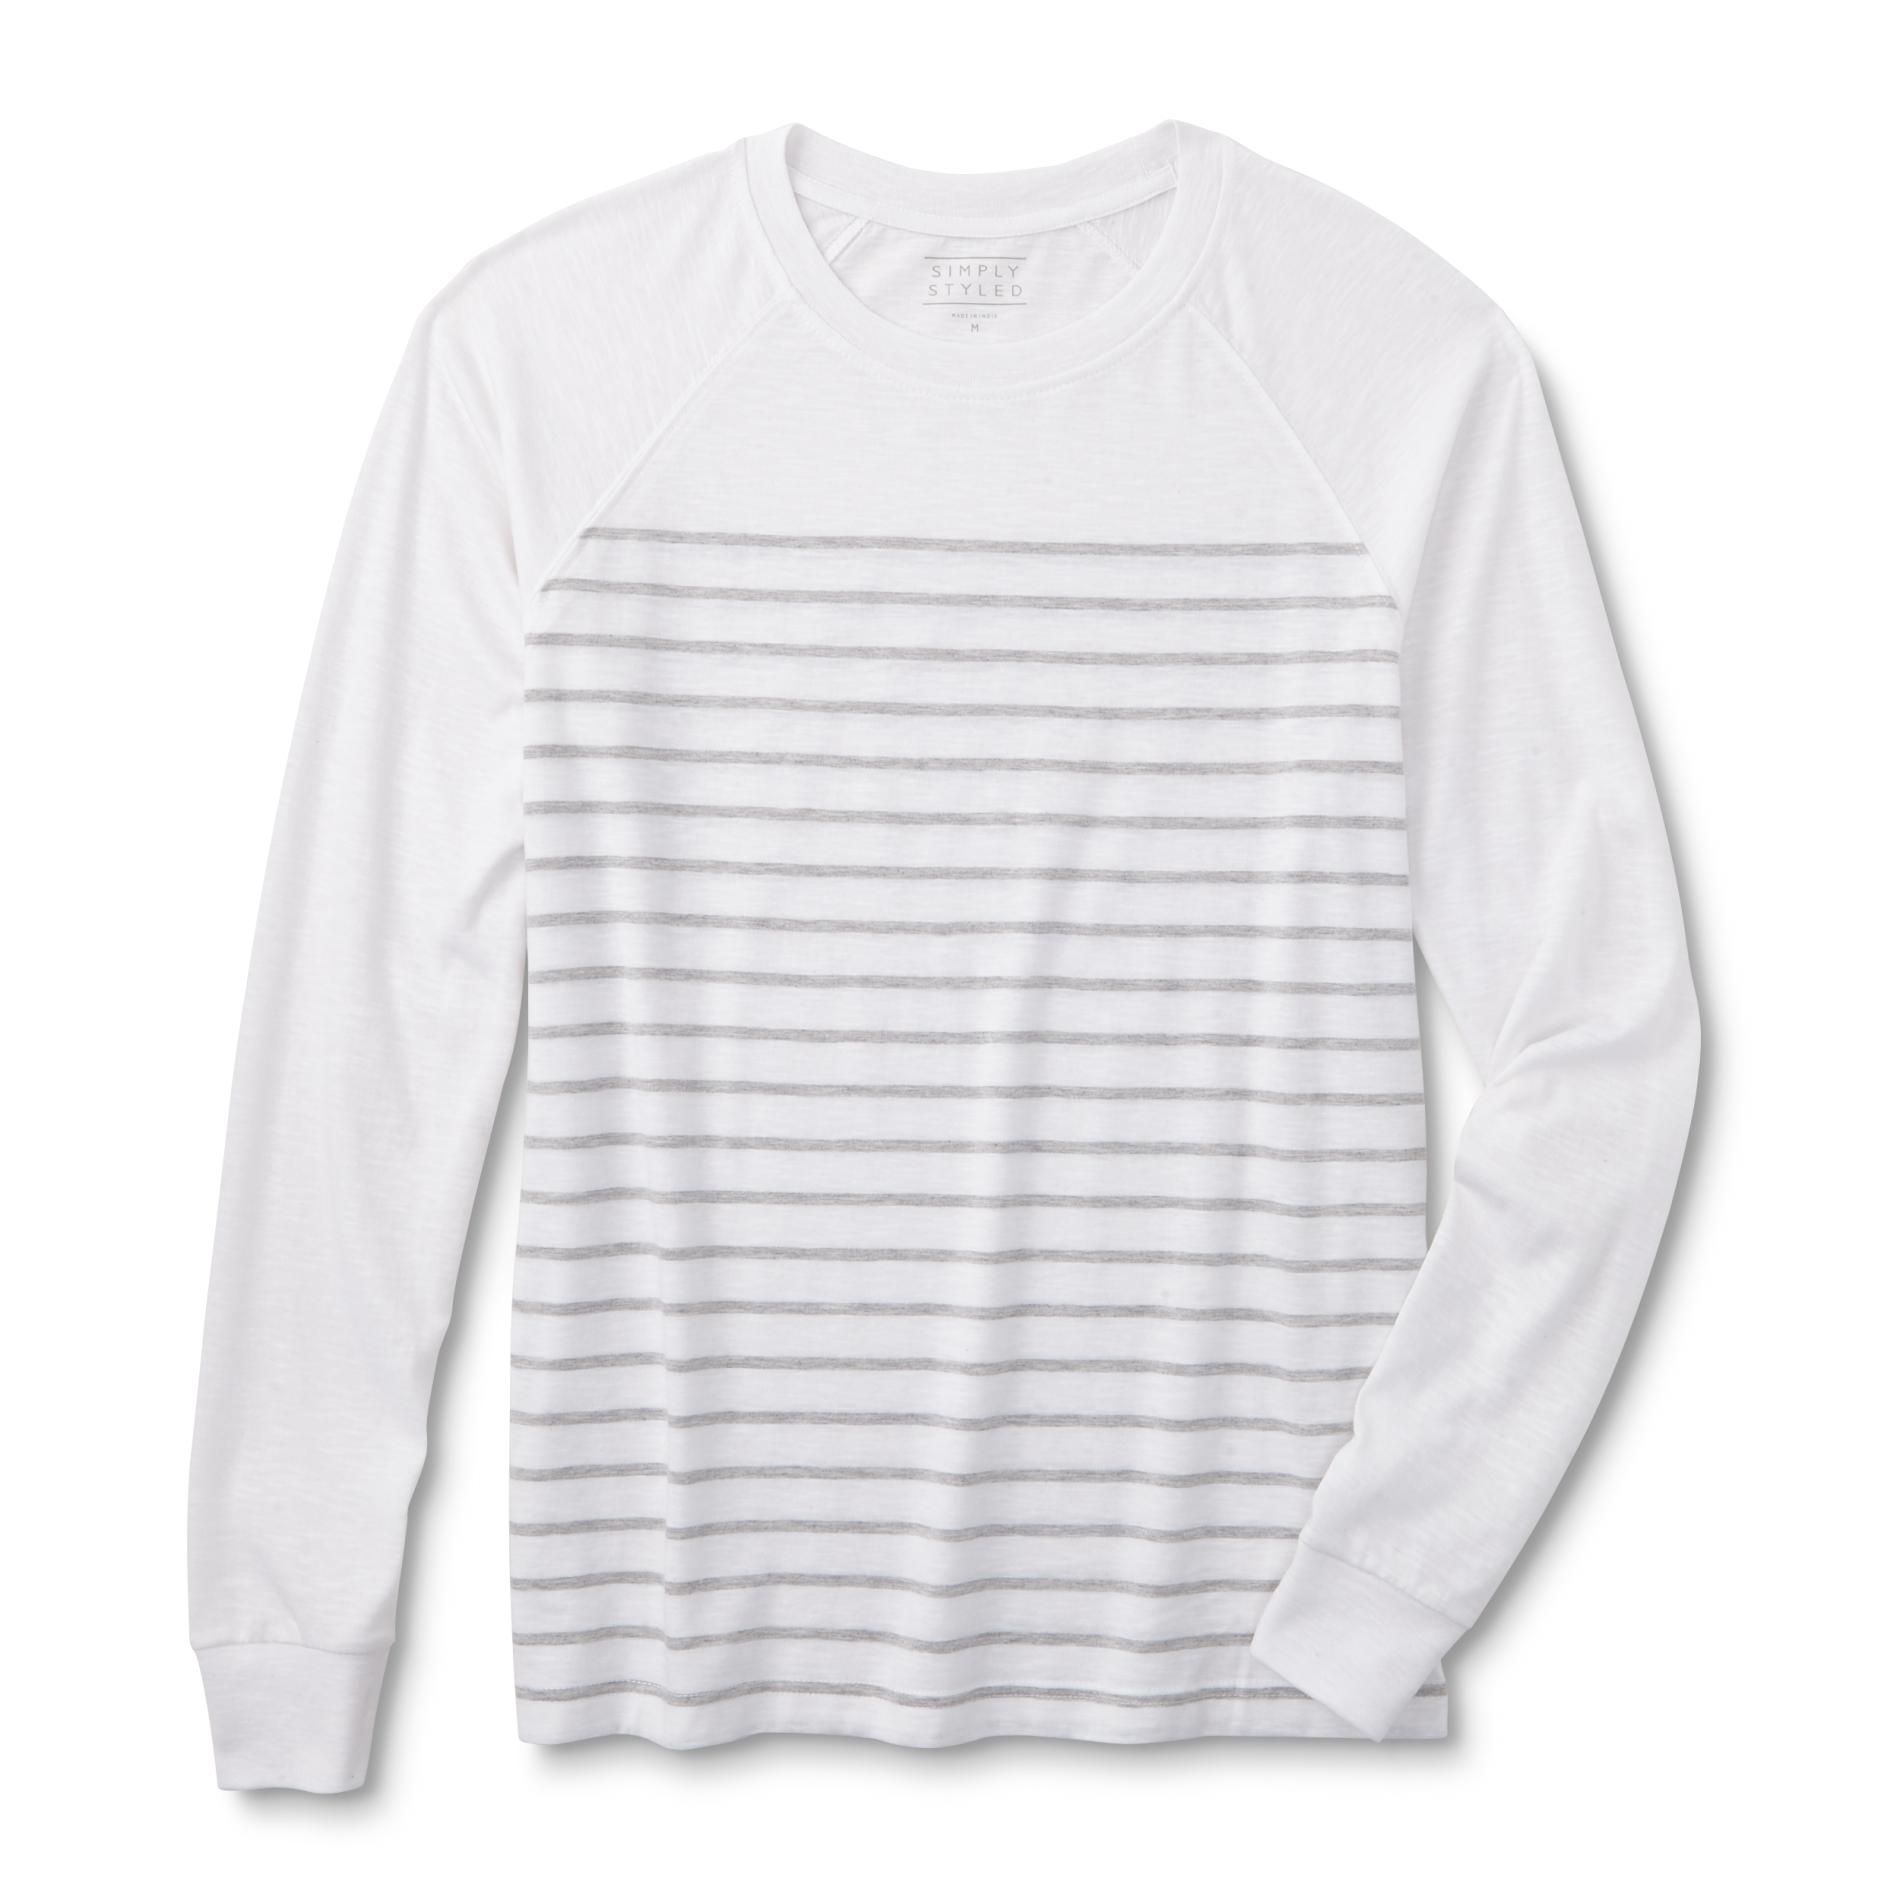 Simply Styled Men's Long-Sleeve T-Shirt - Striped